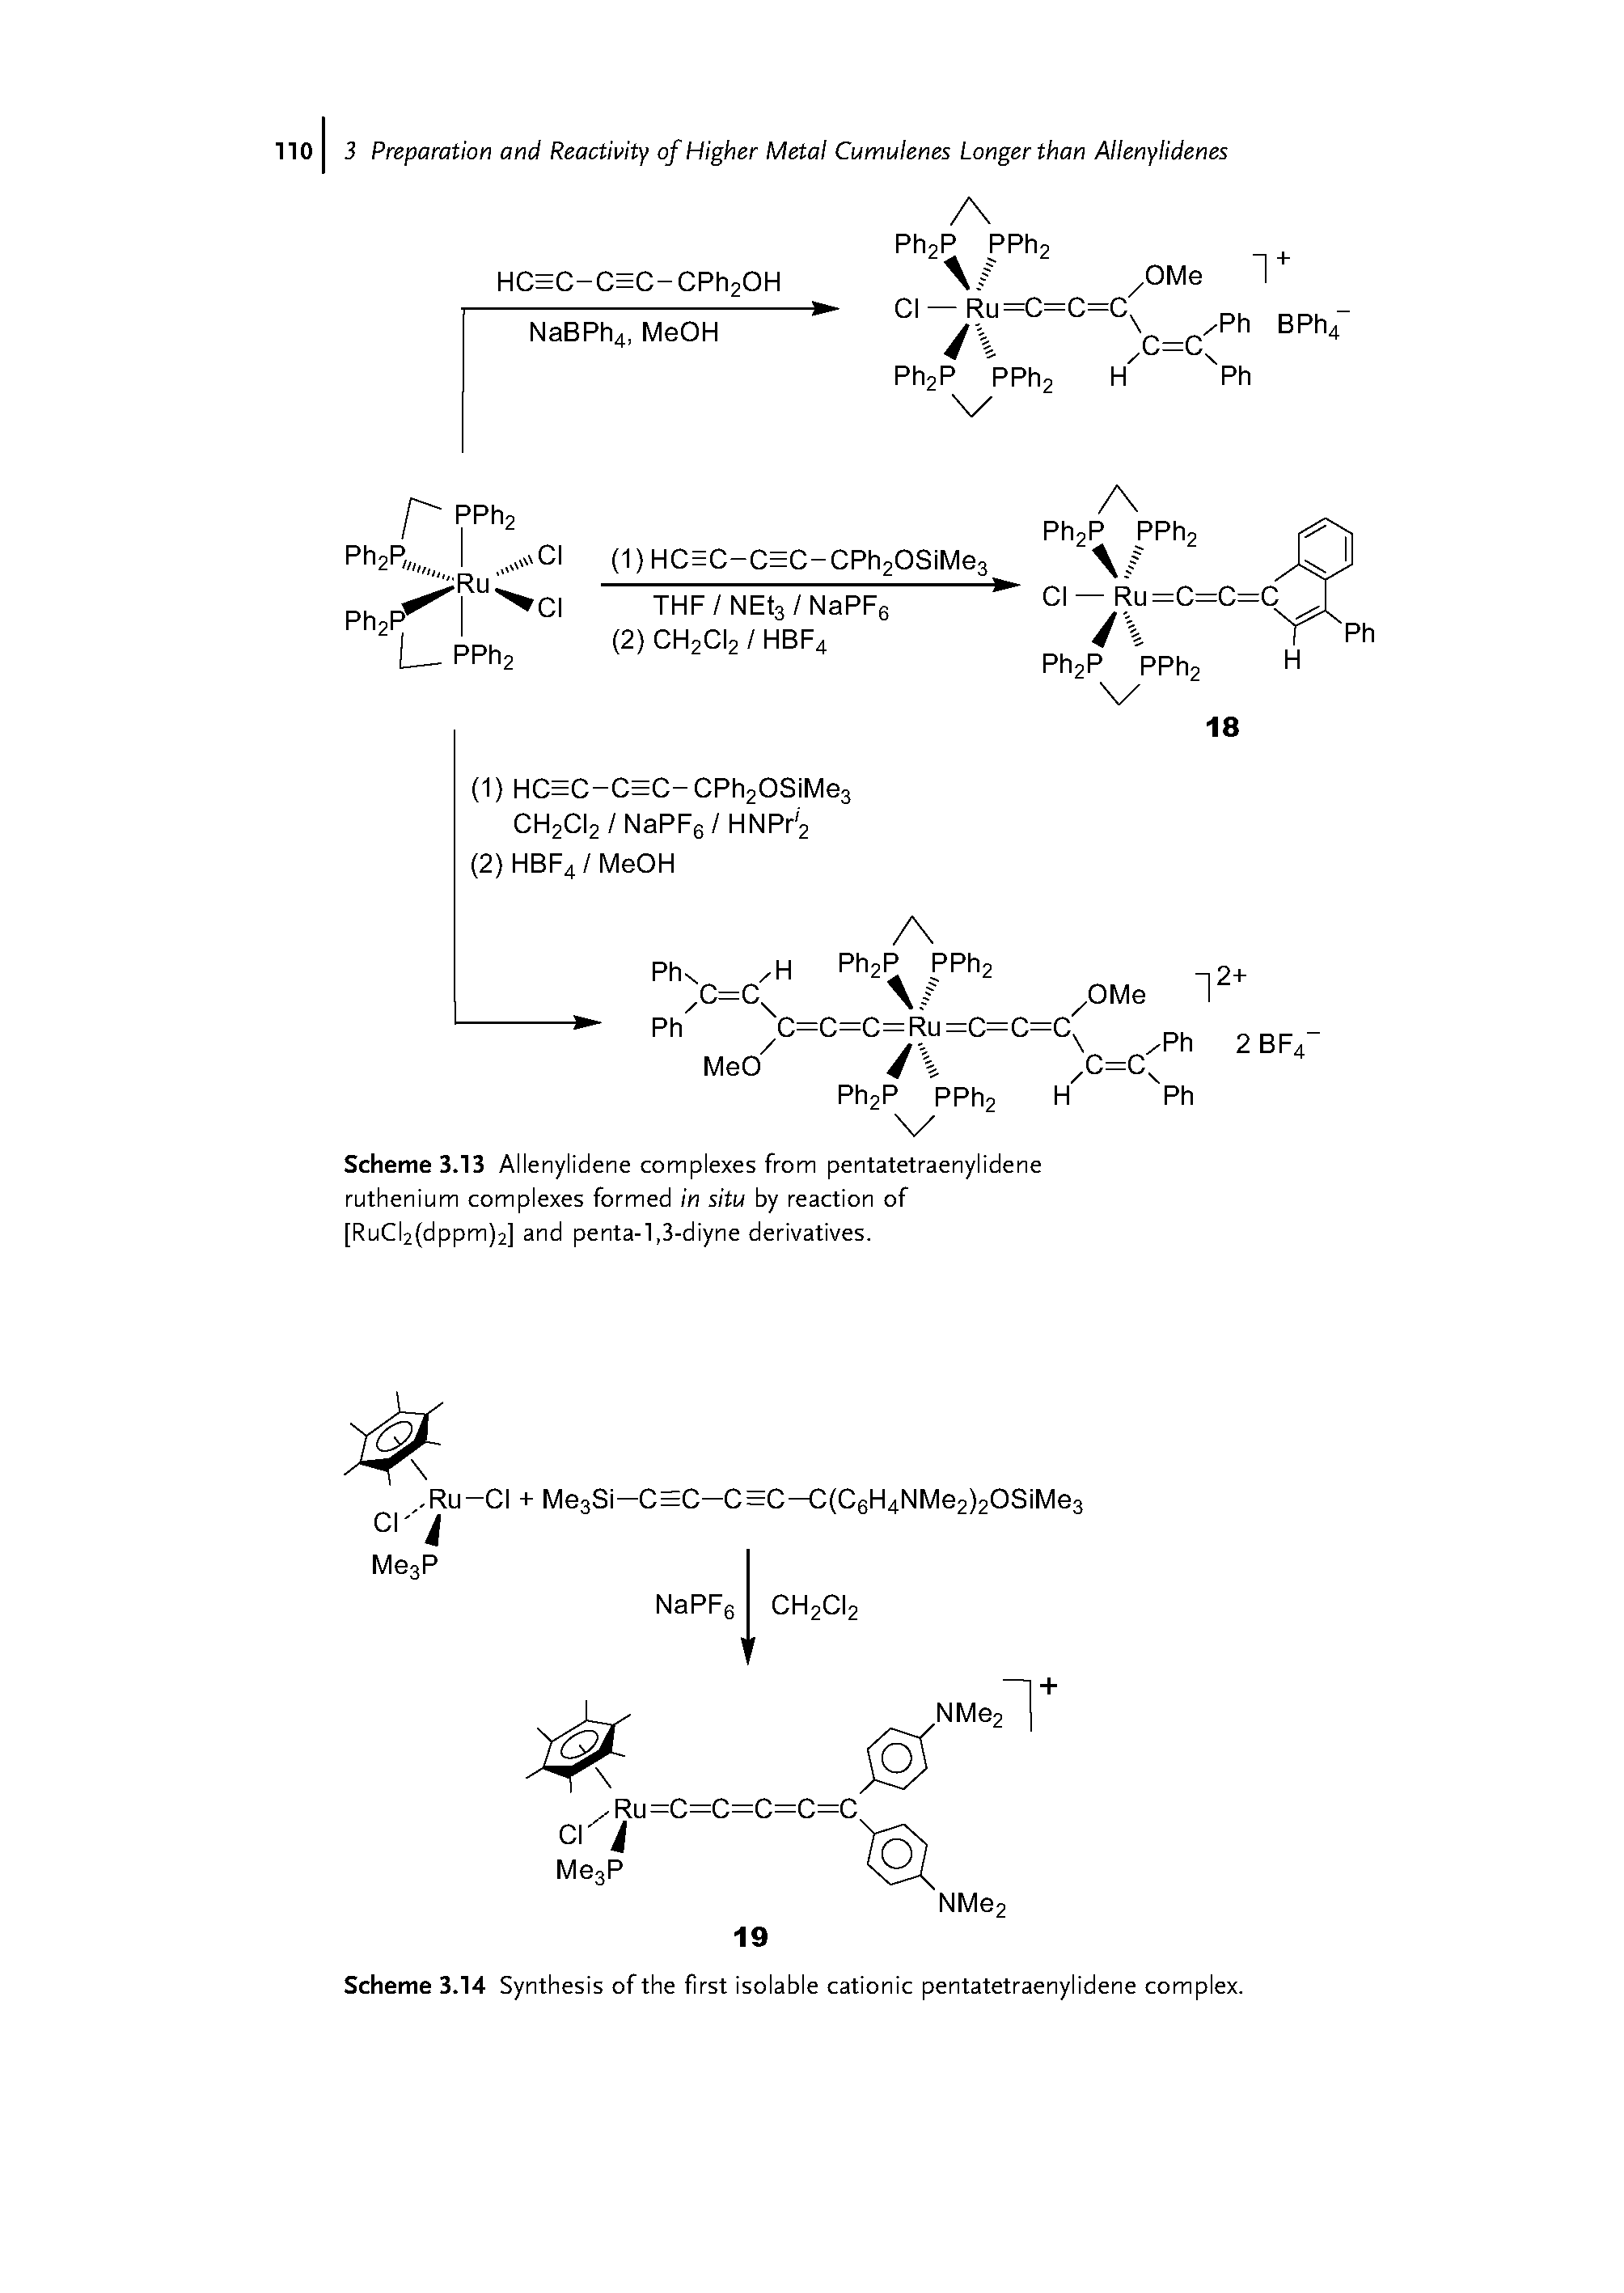 Scheme 3.13 Allenylidene complexes from pentatetraenylidene ruthenium complexes formed in situ by reaction of [RuCl2(dppm)2] and penta-l,3-diyne derivatives.